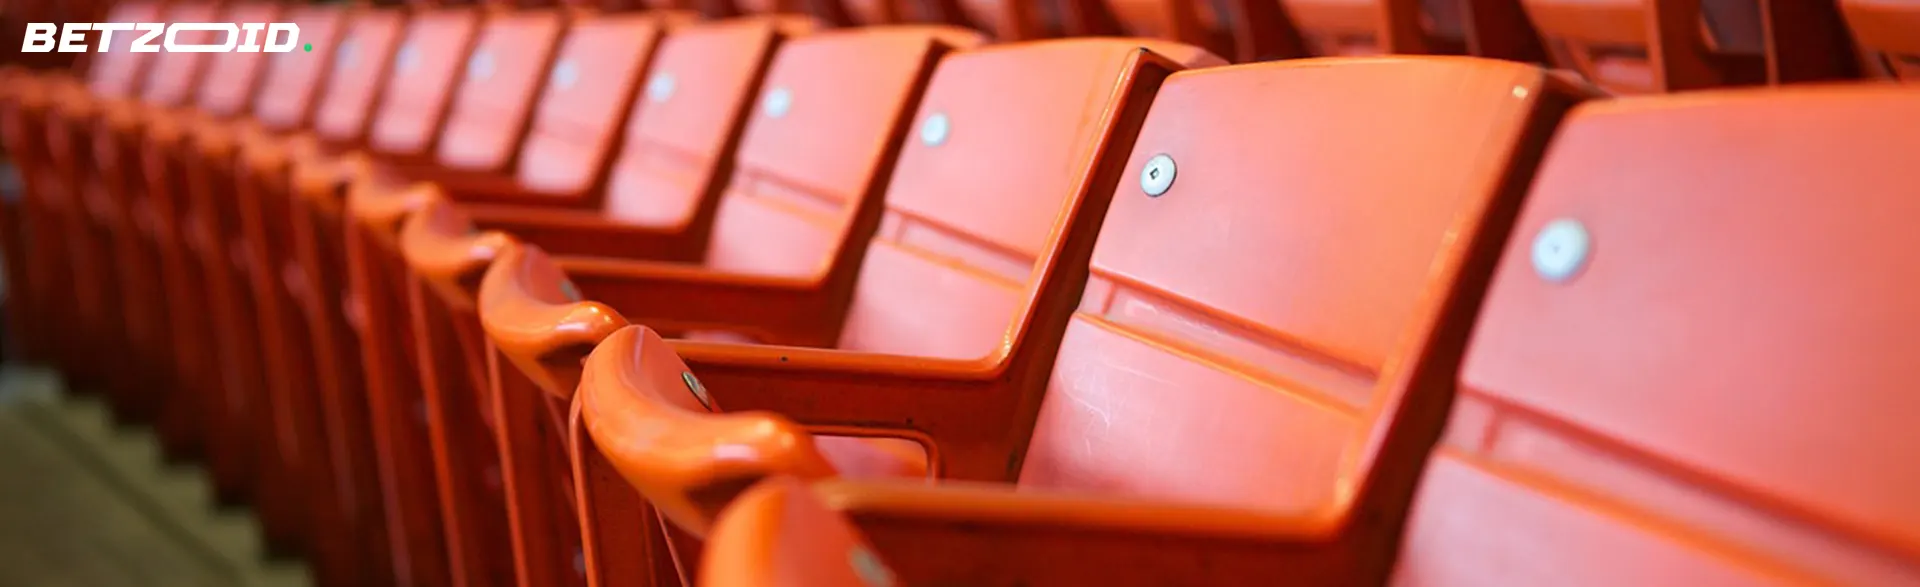 Long row of empty coral red stadium seats with a blurred background.